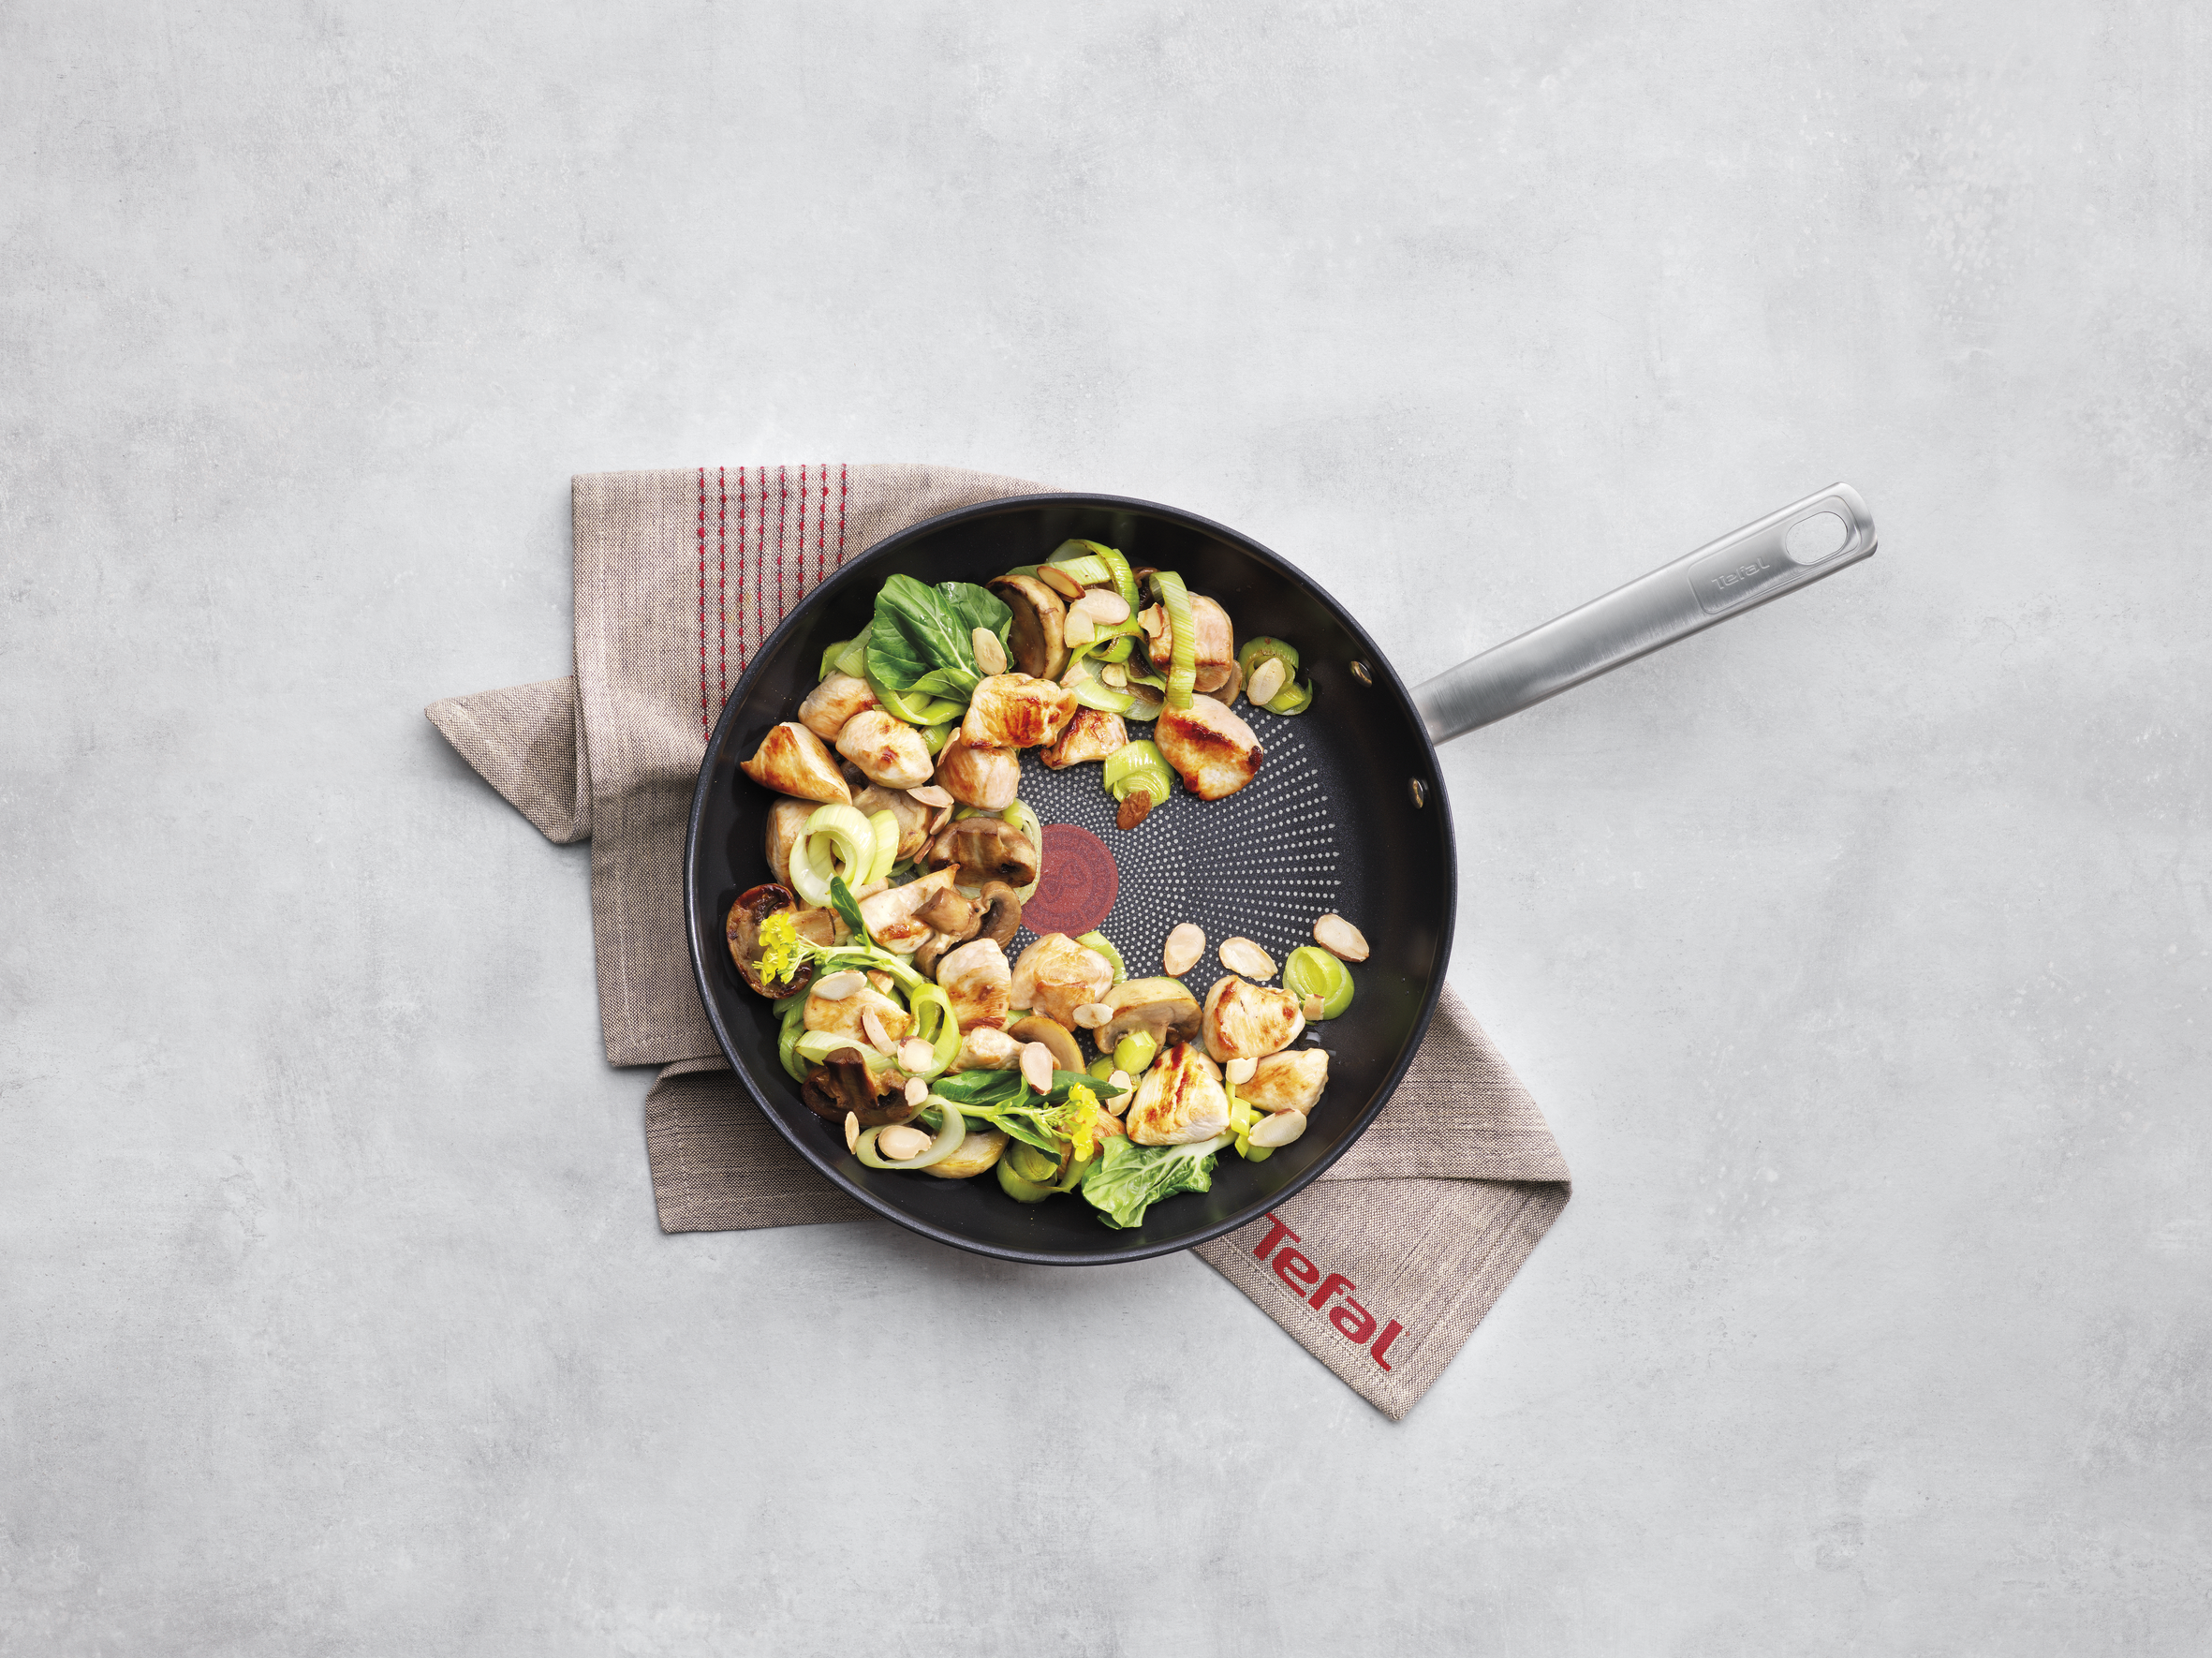 Tefal Virtuoso Stainless Steel Induction Frypan 30cm